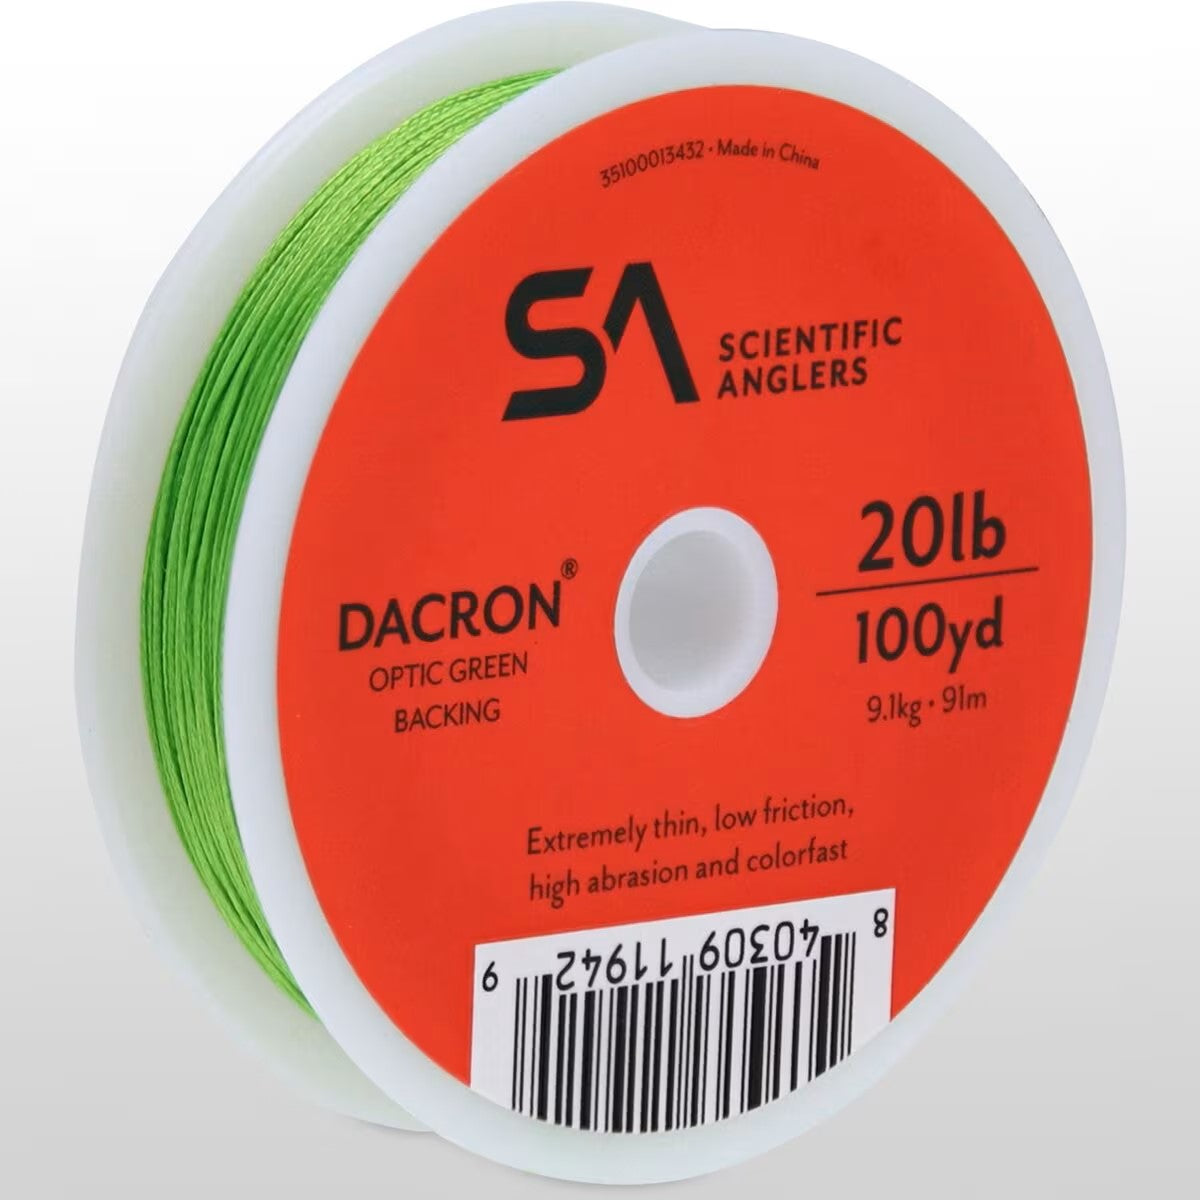 Scientific Anglers Dacron Backing 100yds in Optic Green 20lb